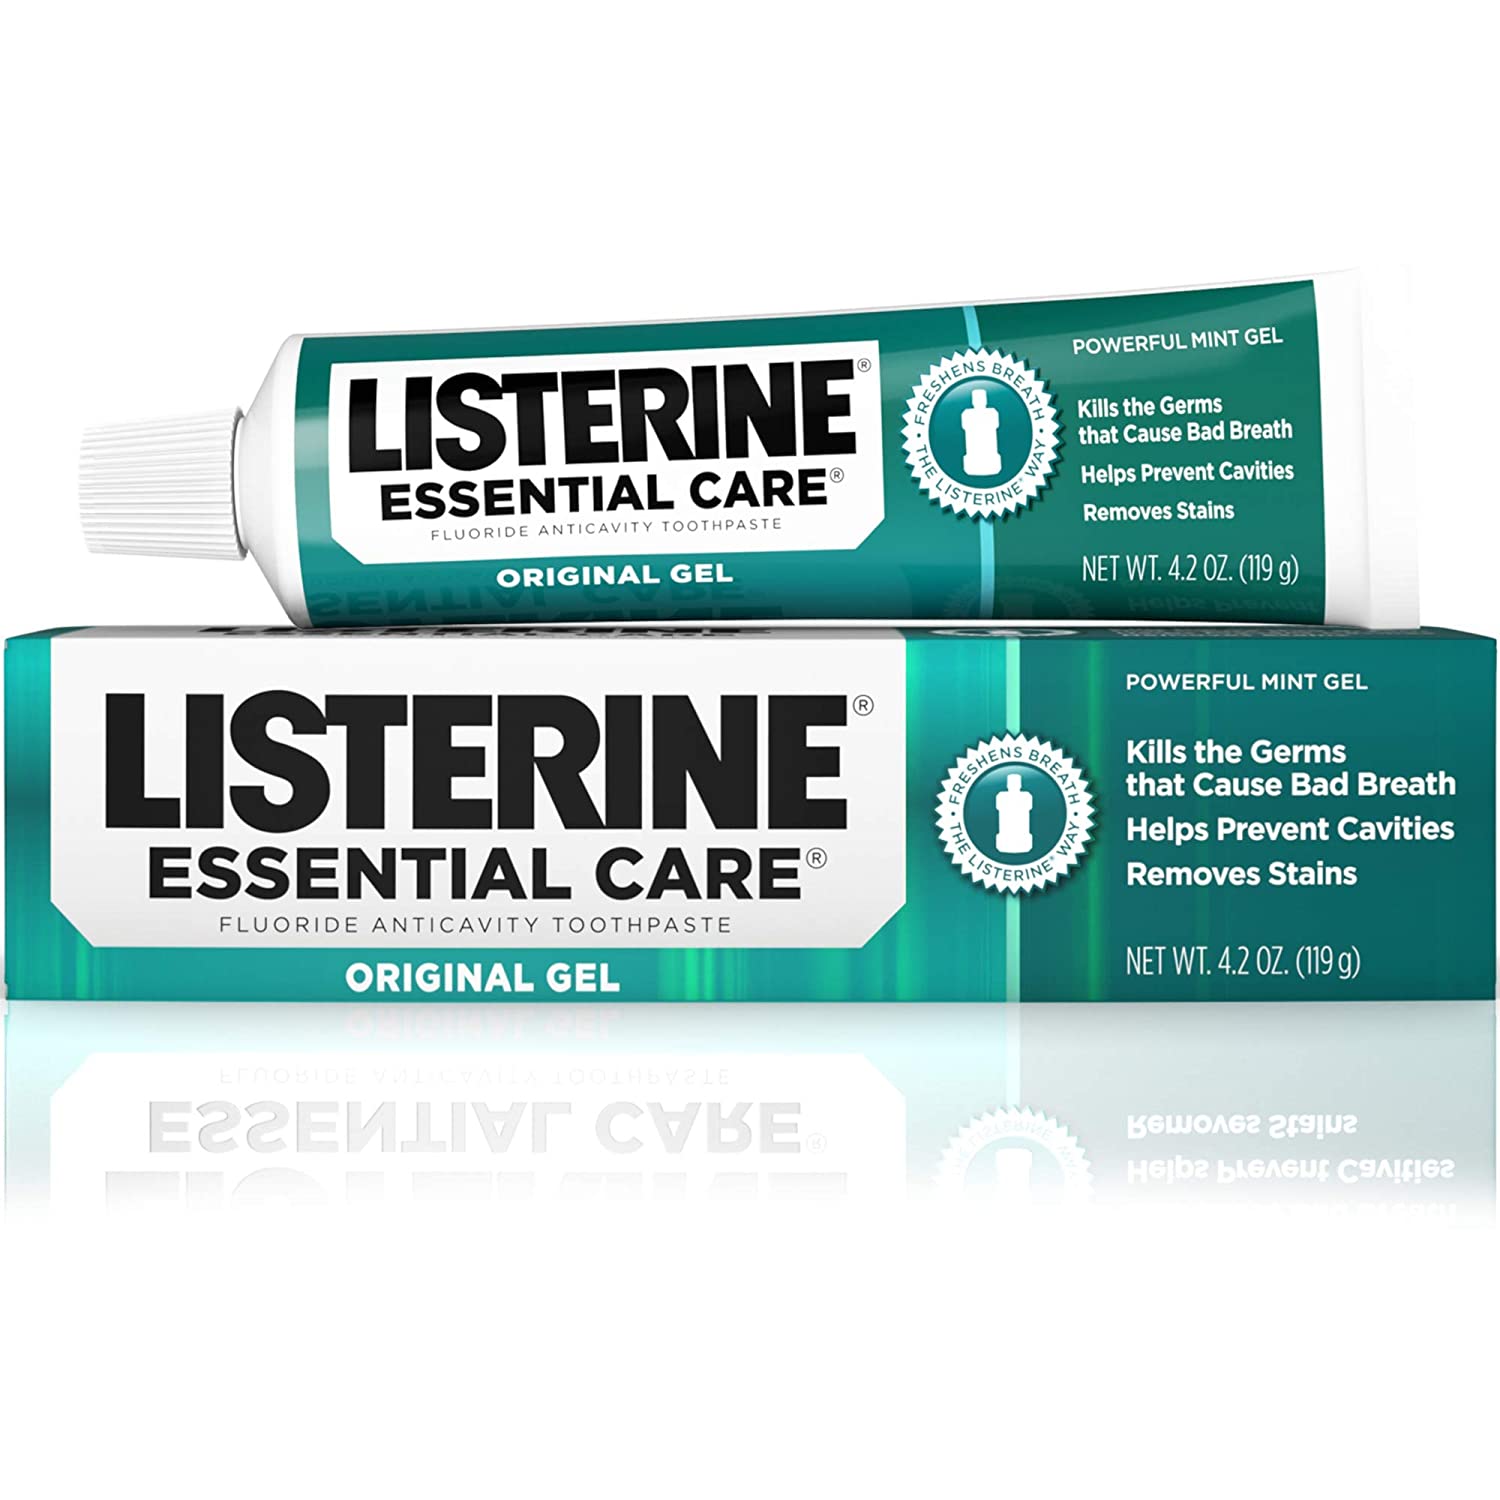 Listerine Essential Care Toothpaste Gel 4.20 oz (Pack of 2) - image 2 of 4